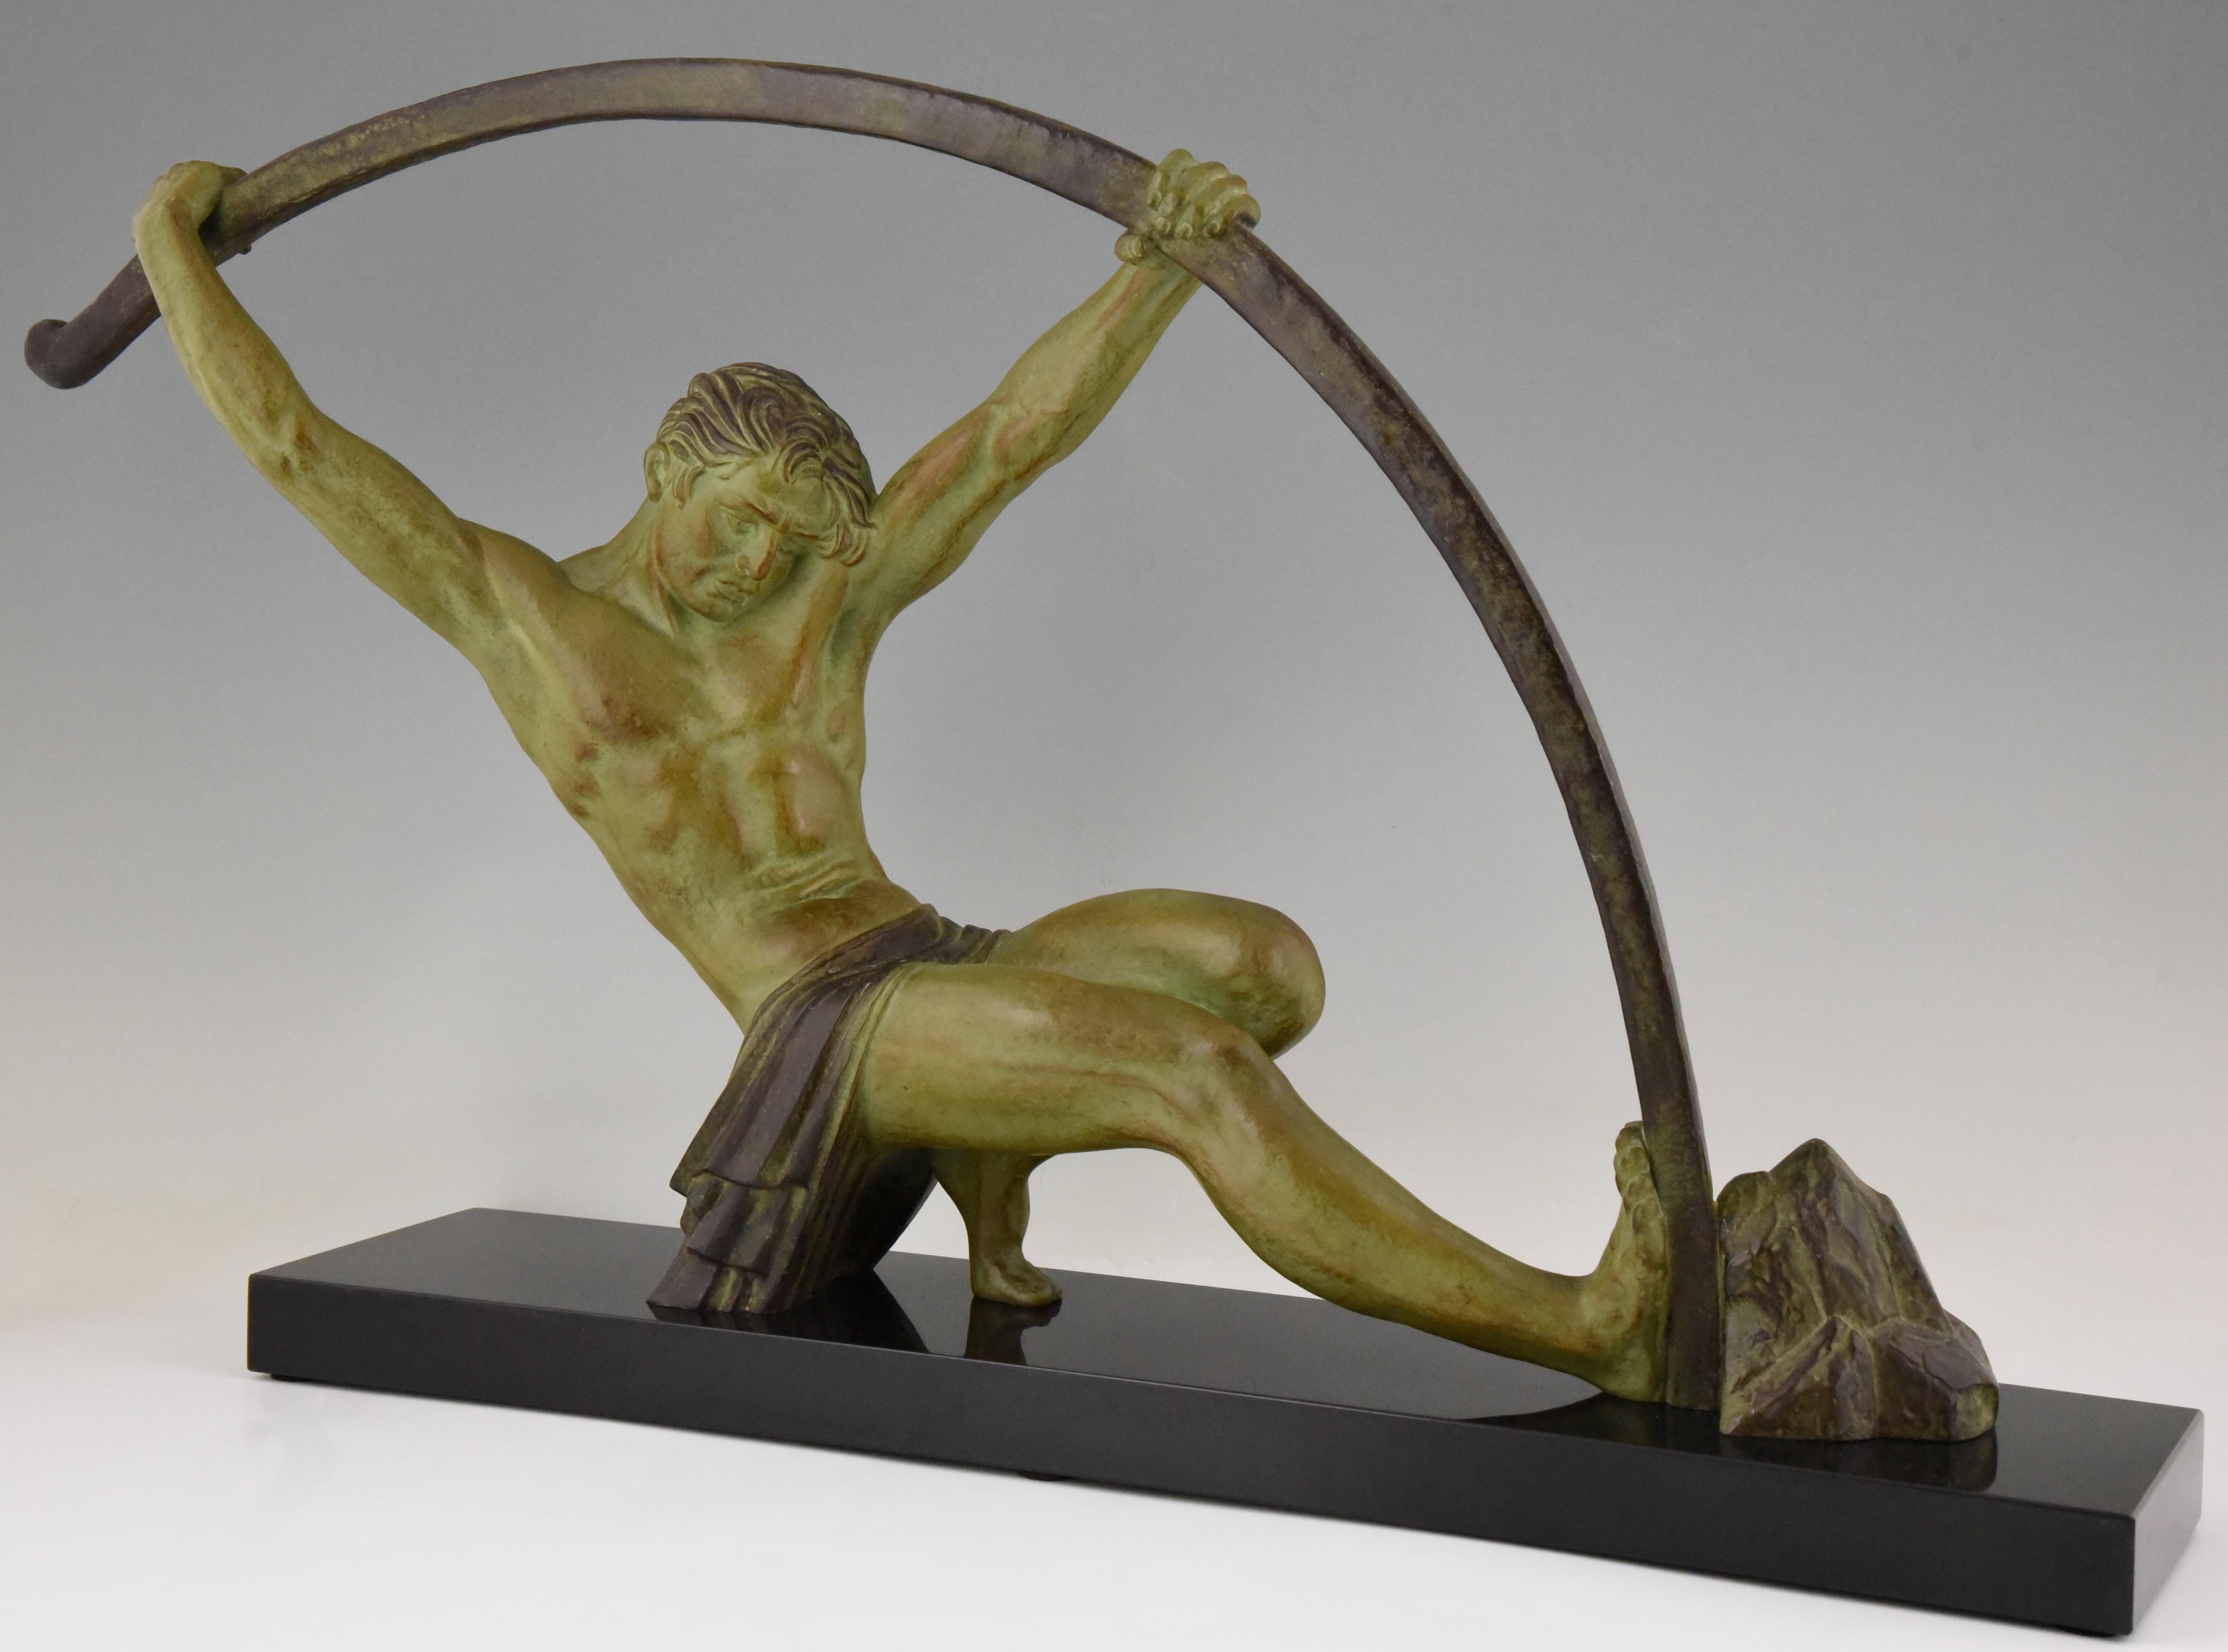 Impressive Art Deco sculpture of an athletic man bending a bar.
This work is titled l'age du bronze and signed by Demetre H. Chiparus. 
The sculpture has a beautiful patina and stands on a Belgian Black marble base. France ca. 1930. 

This model